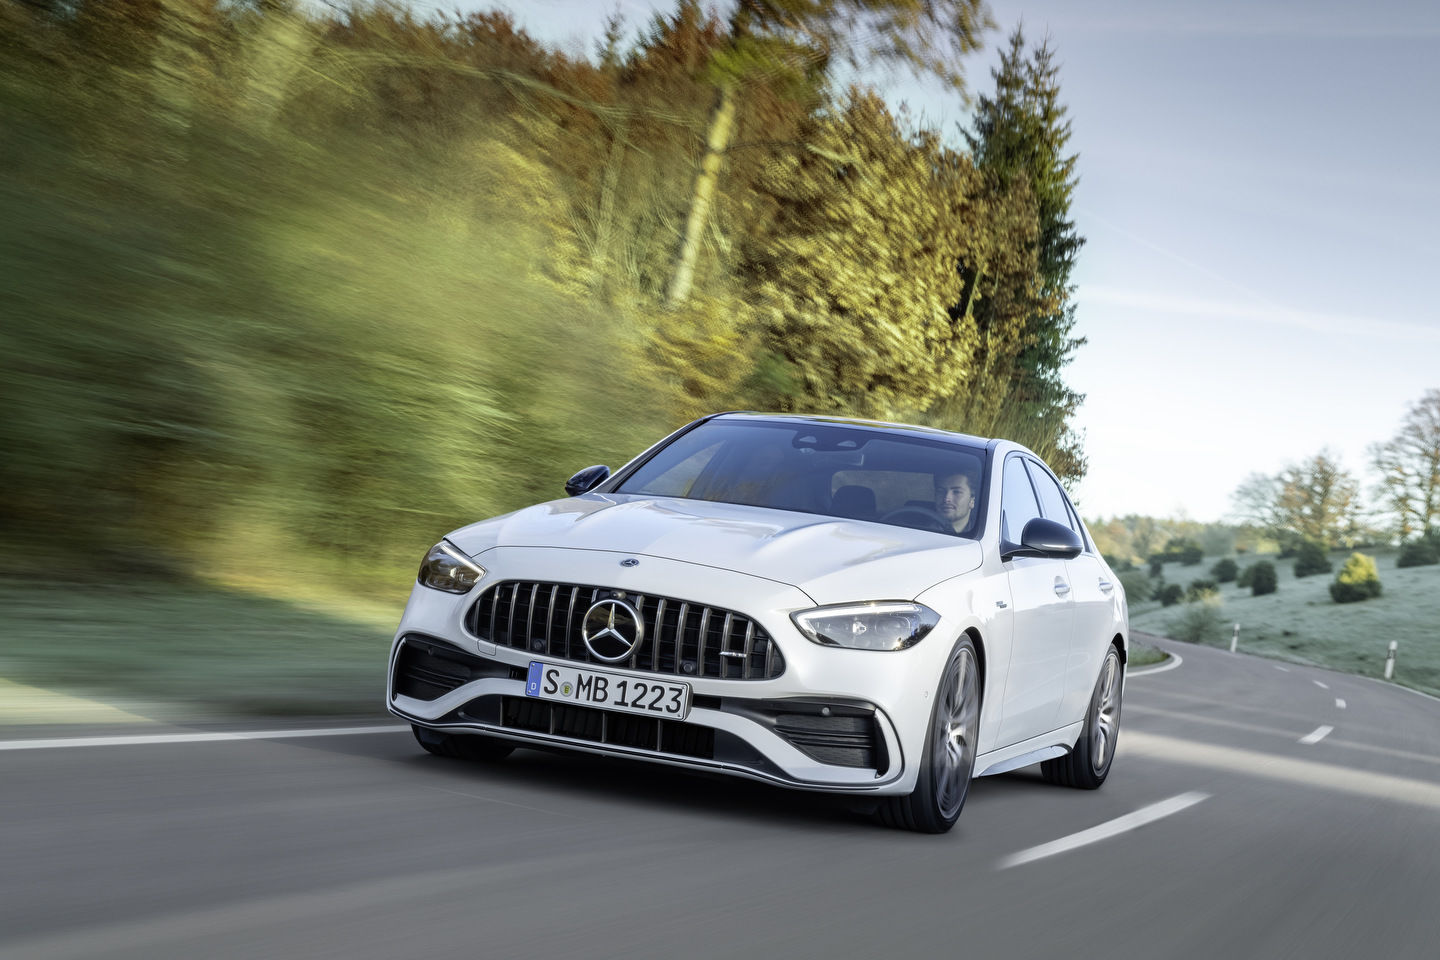 The 2022 Mercedes-AMG C 43 4MATIC gets a new turbocharger and enhanced tech features